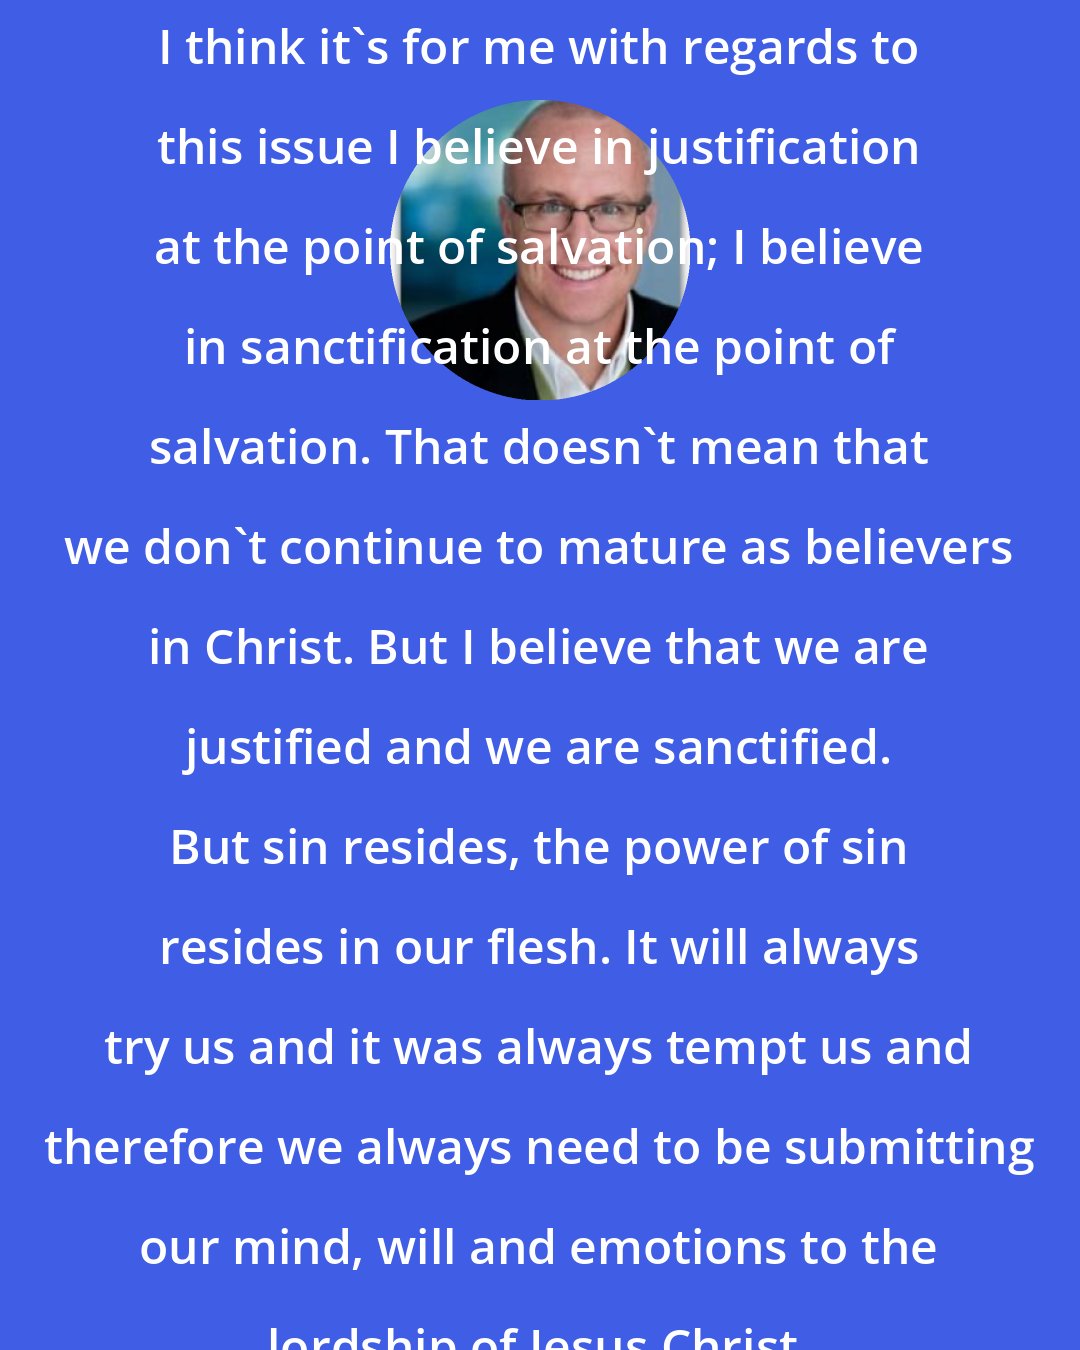 Alan Chambers: I think it's for me with regards to this issue I believe in justification at the point of salvation; I believe in sanctification at the point of salvation. That doesn't mean that we don't continue to mature as believers in Christ. But I believe that we are justified and we are sanctified. But sin resides, the power of sin resides in our flesh. It will always try us and it was always tempt us and therefore we always need to be submitting our mind, will and emotions to the lordship of Jesus Christ.